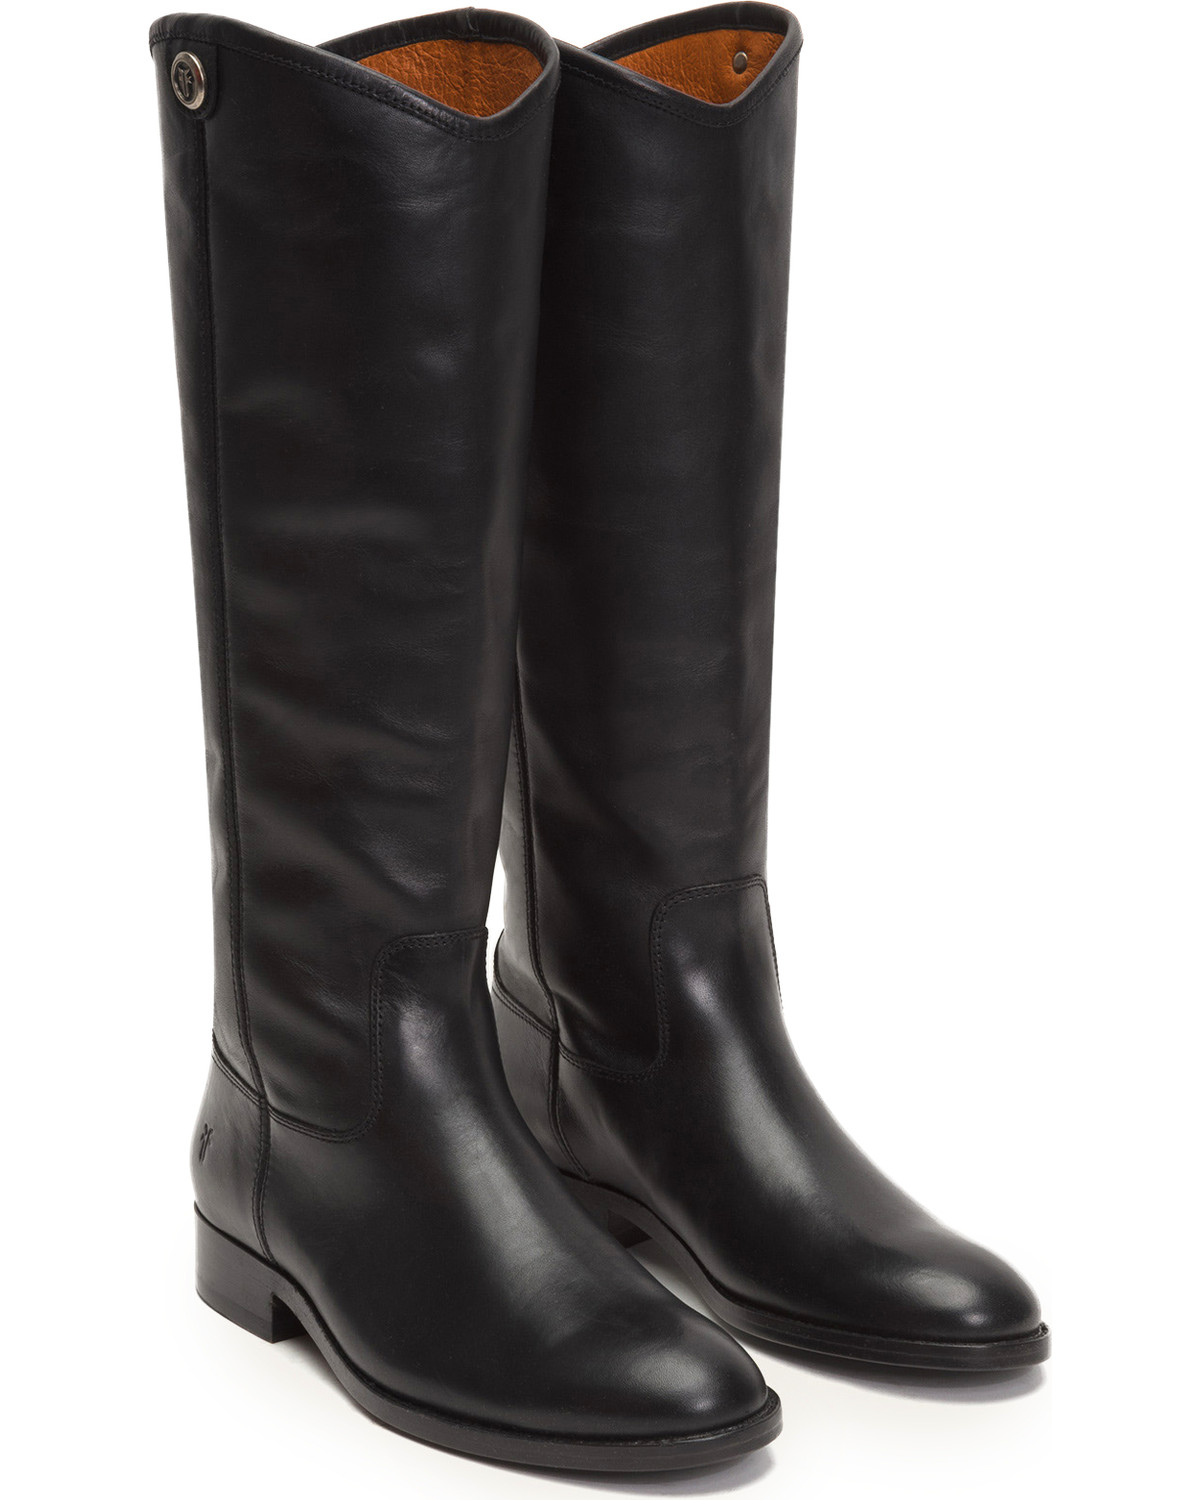 Tall Boots - Round Toe | Boot Barn